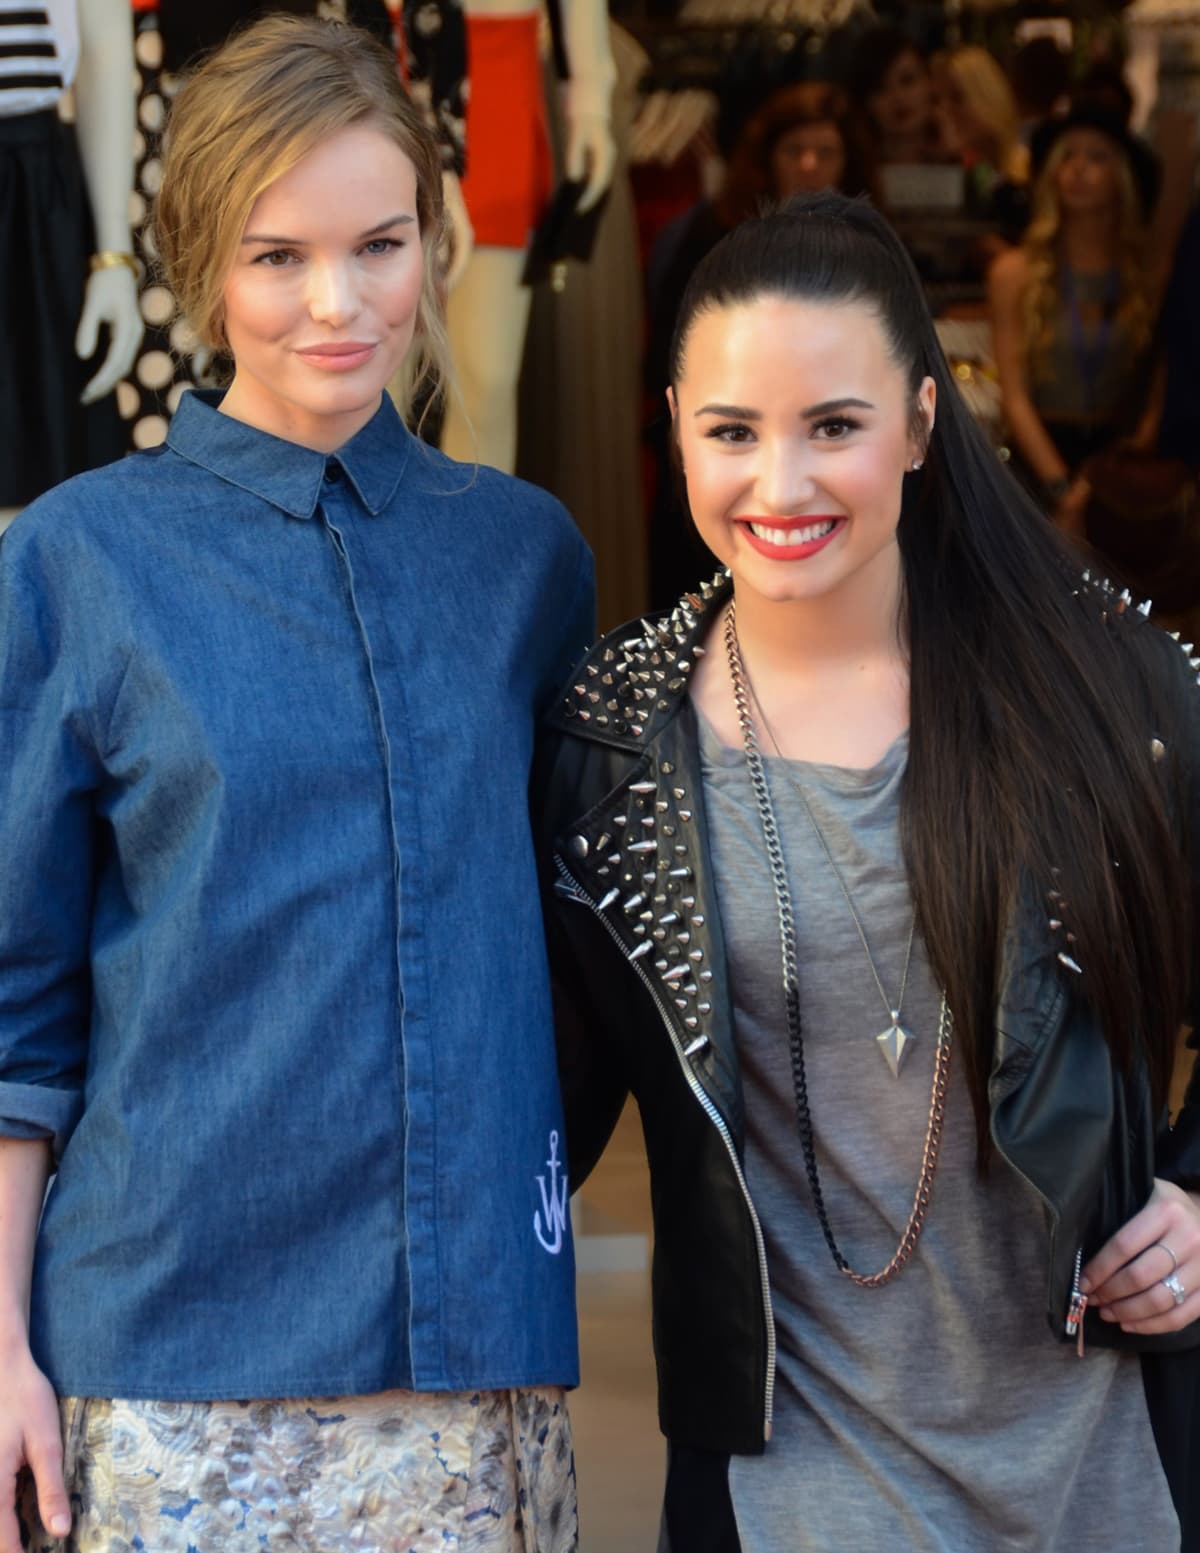 Kate Bosworth and Demi Lovato attend the grand opening of the Topshop Topman LA Store